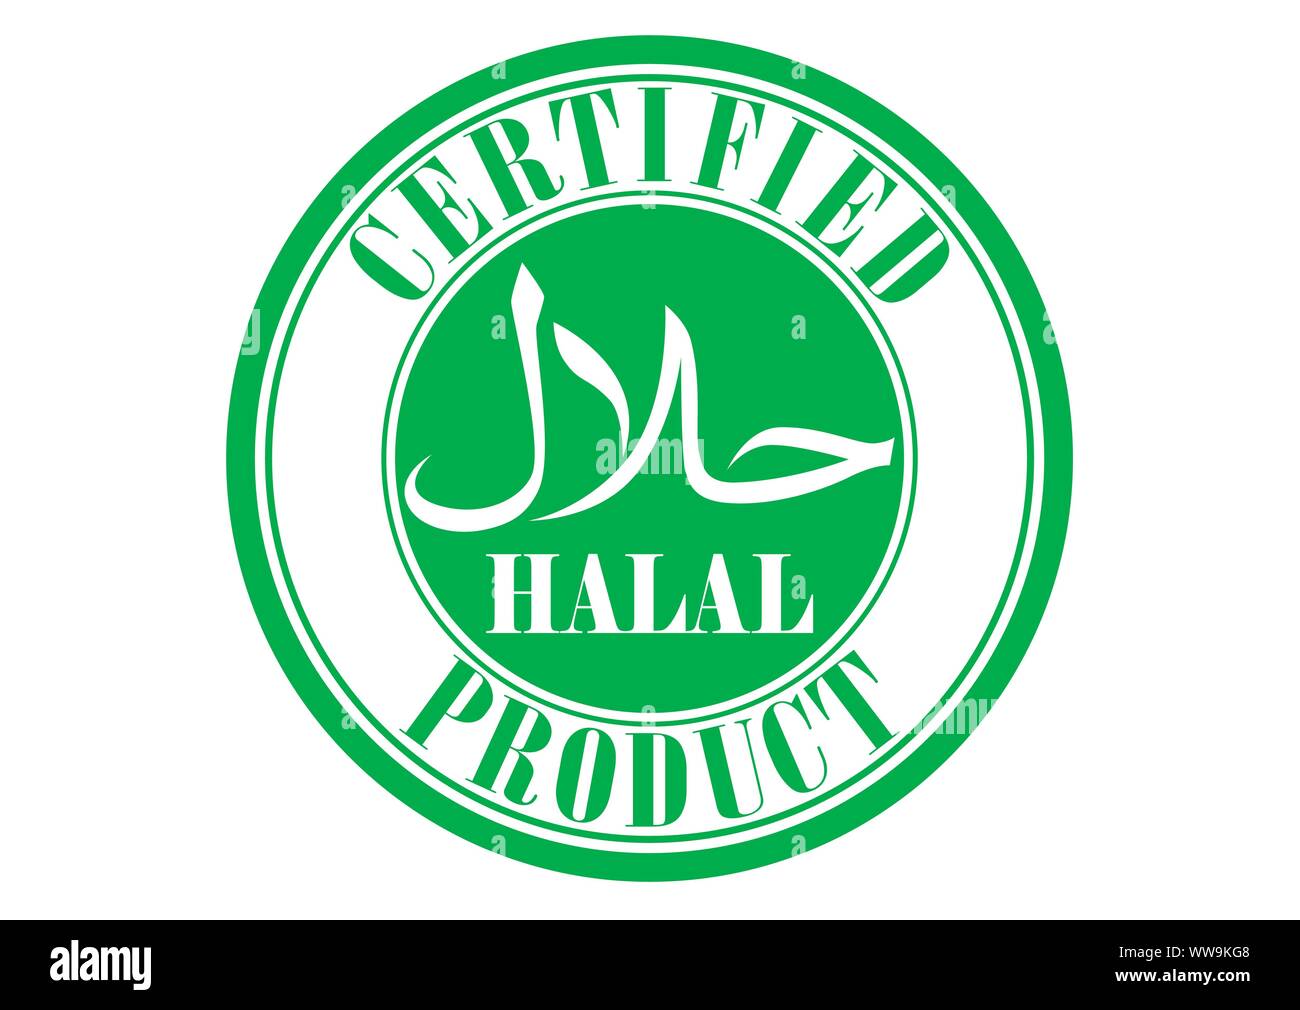 vector illustration of halal certified stamp product Stock Vector